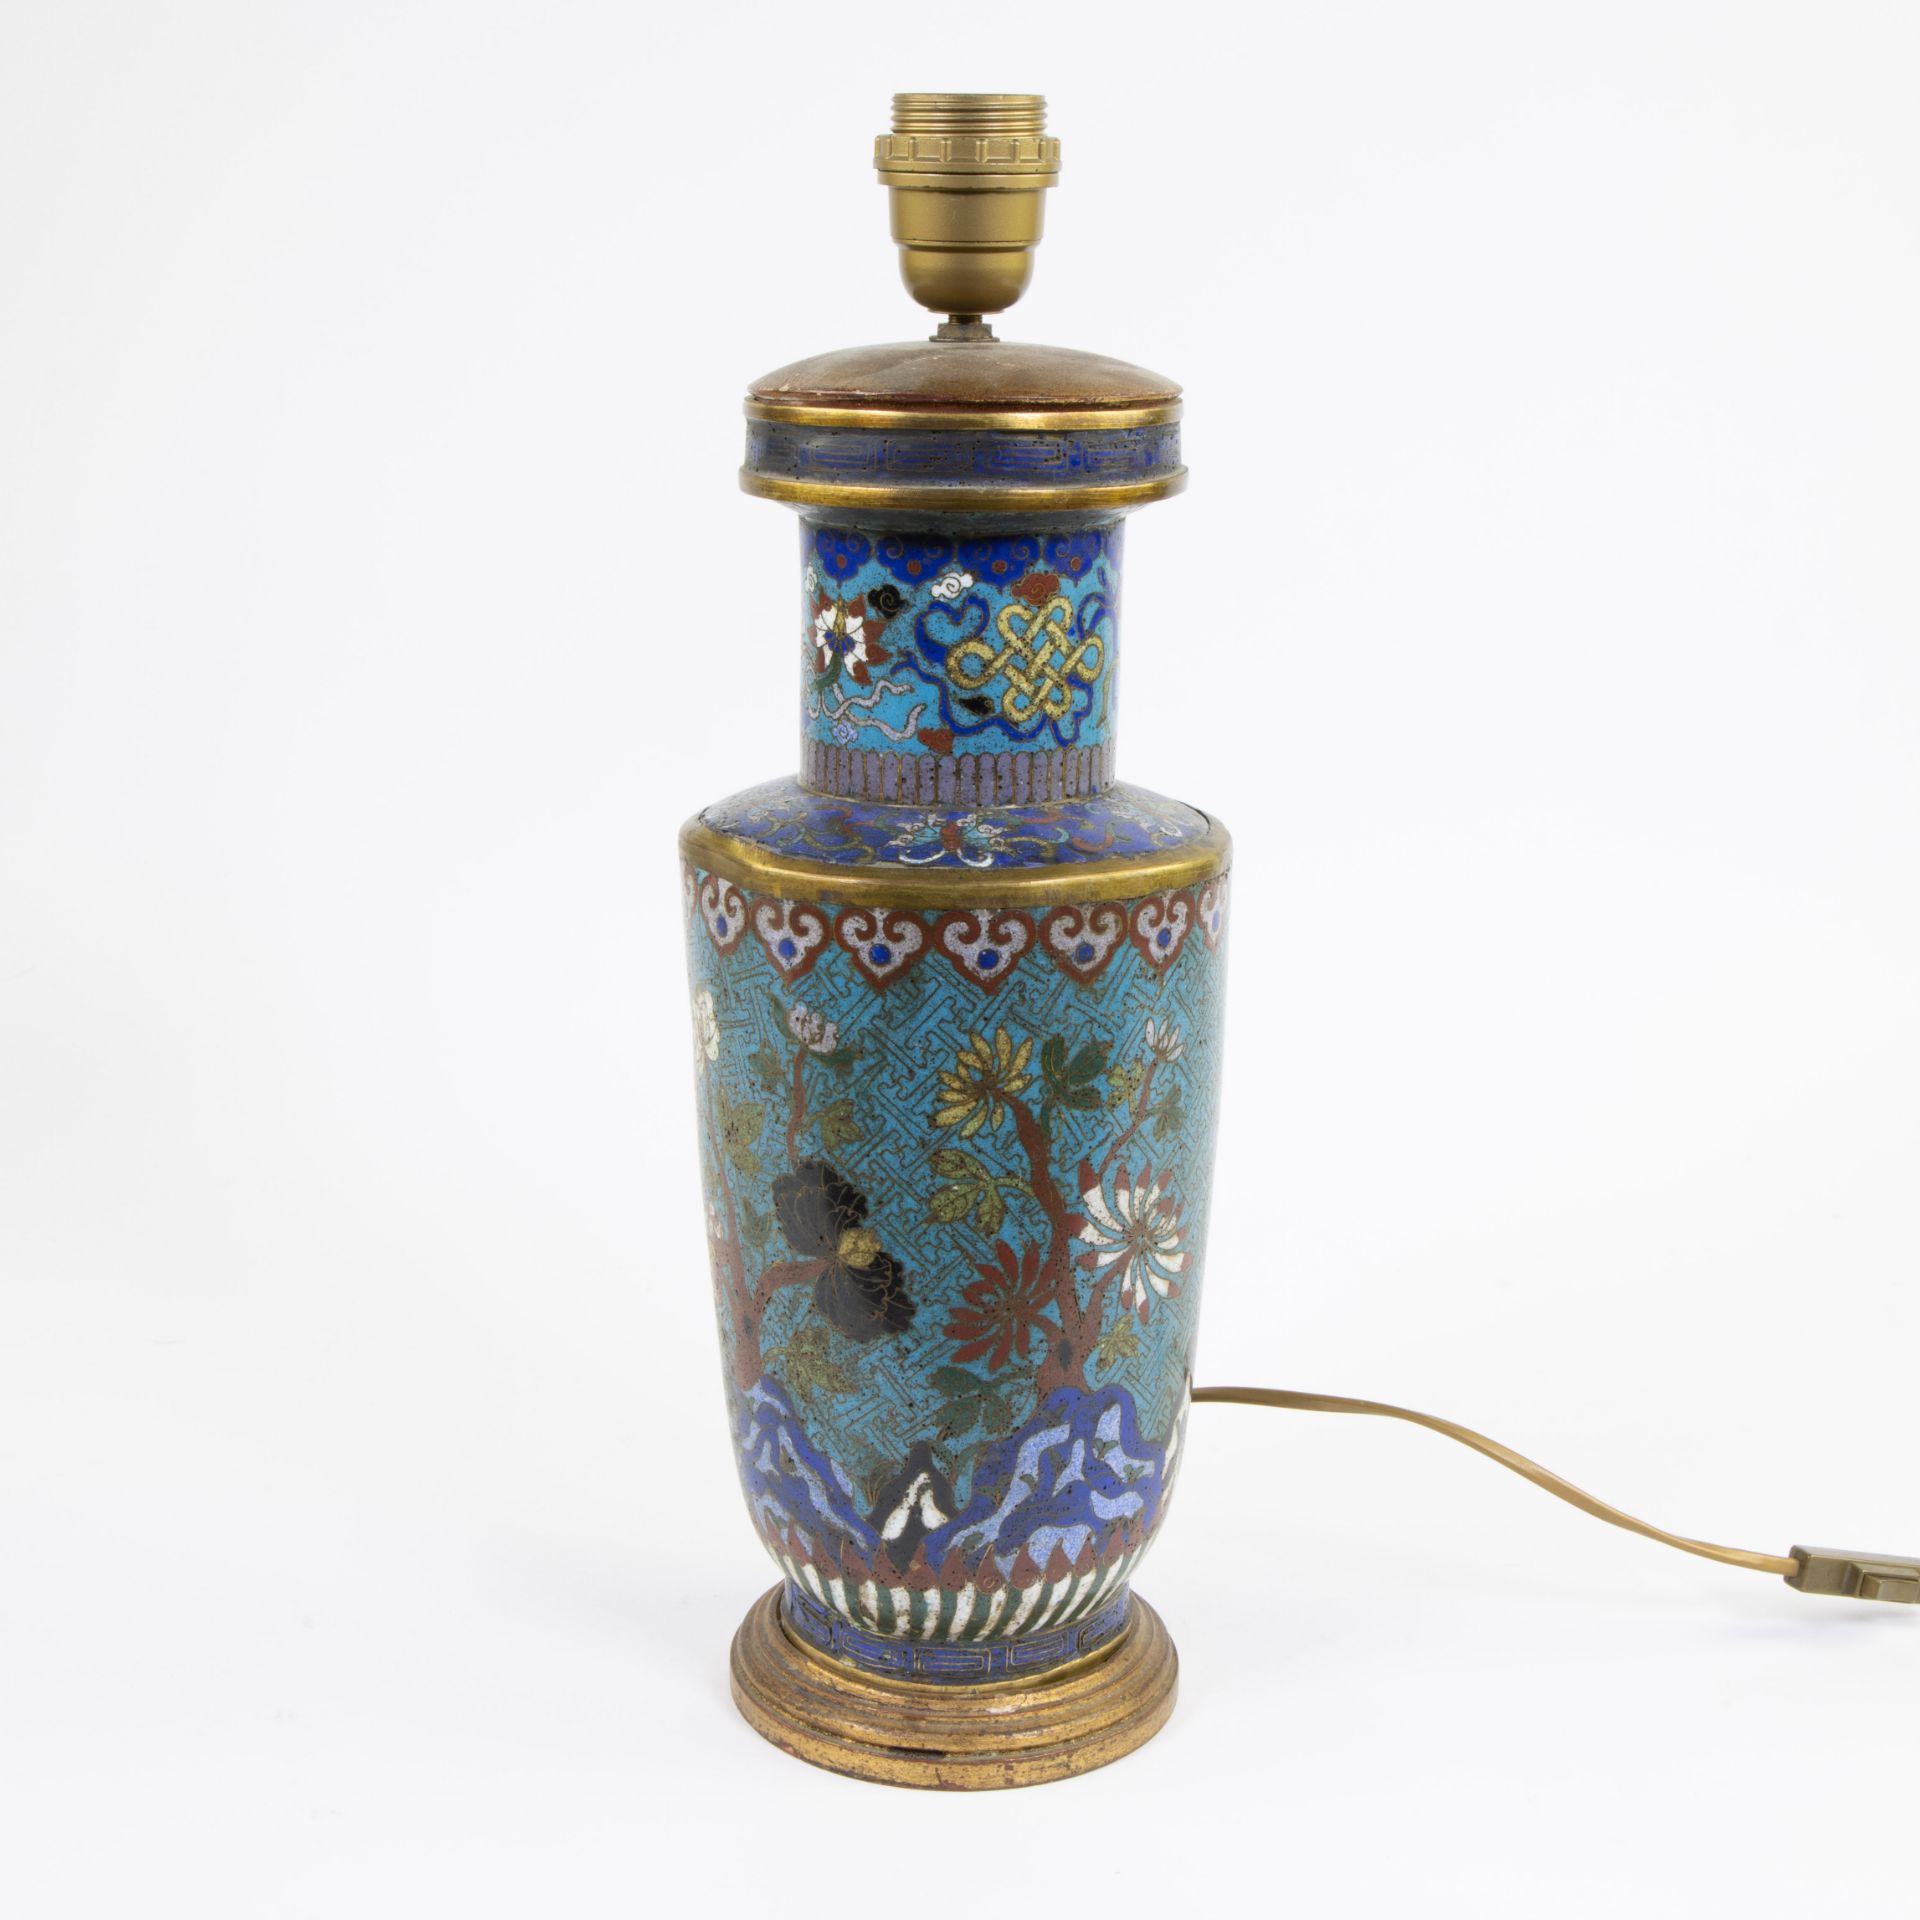 Cloisonné rouleau vase (made into a lamp) with decoration of prunus blossom, lotus and flowering shr